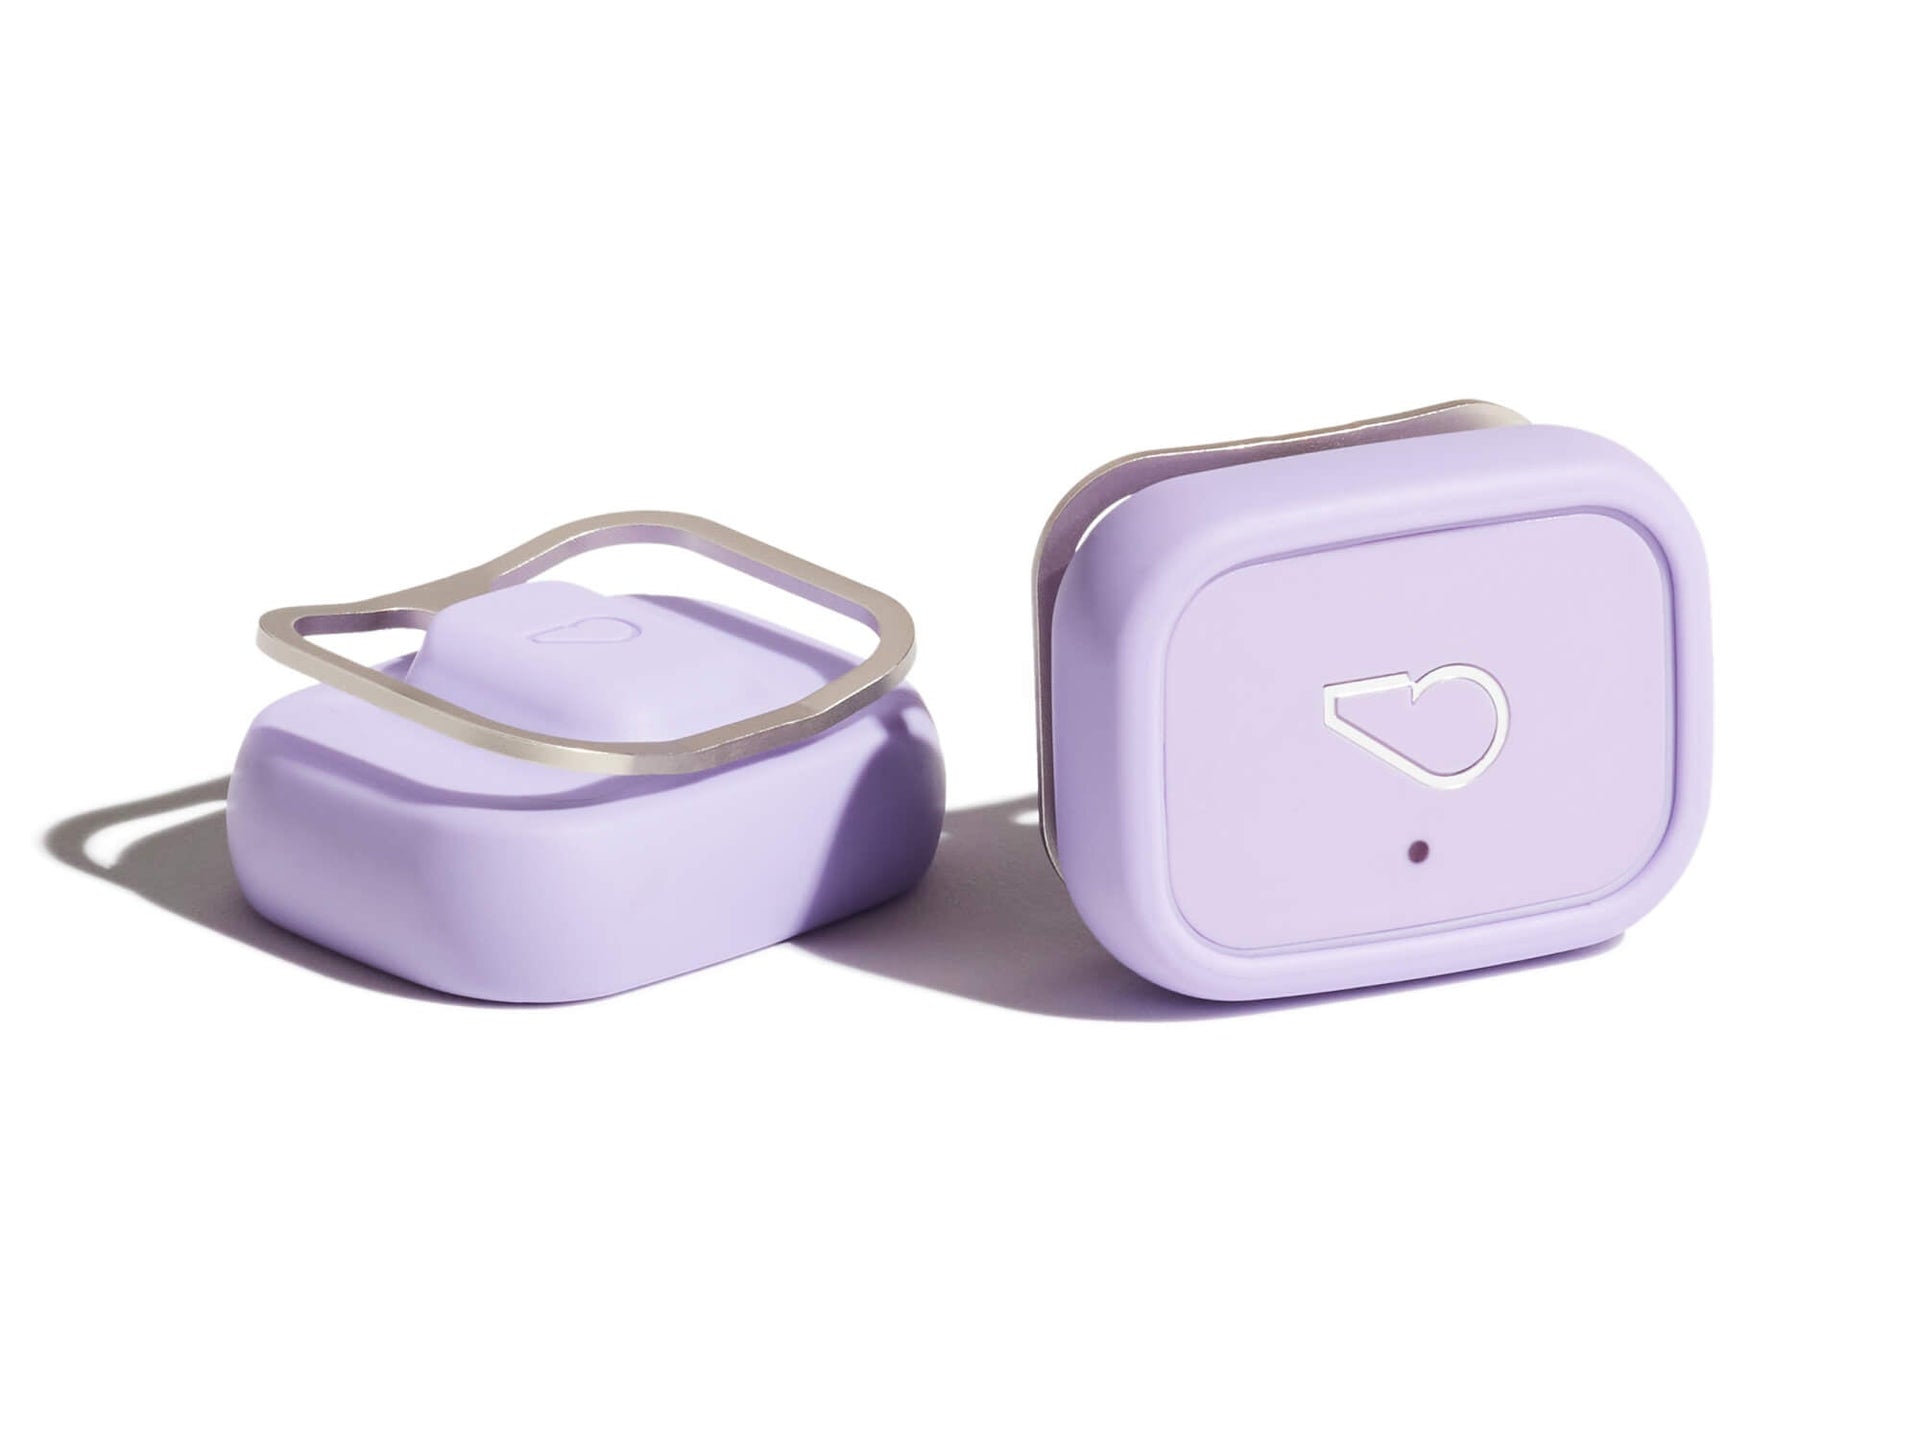 Whistle Health 2.0 Smart Device - Lilac + Silver